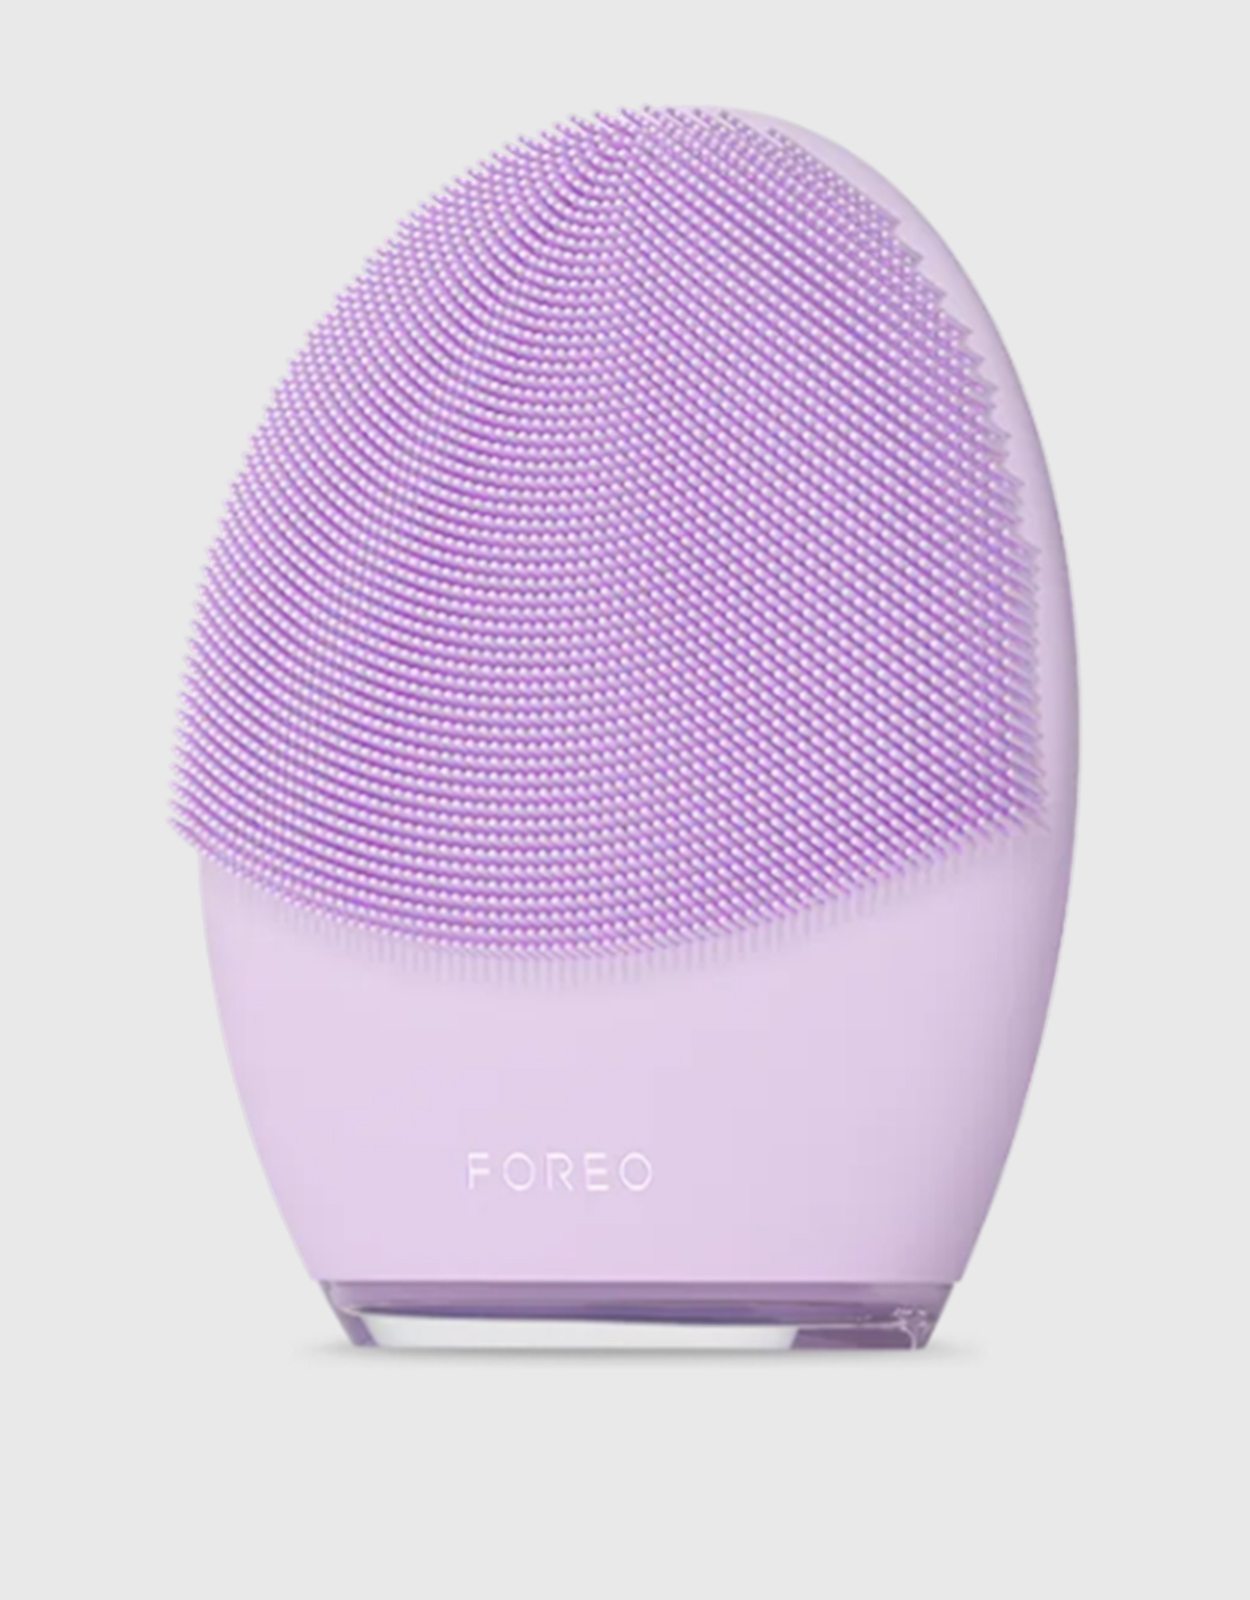 Firming Tools) Smart (Skincare,Skincare Device Luna 4 Cleansing 2-In-1 And Facial Foreo